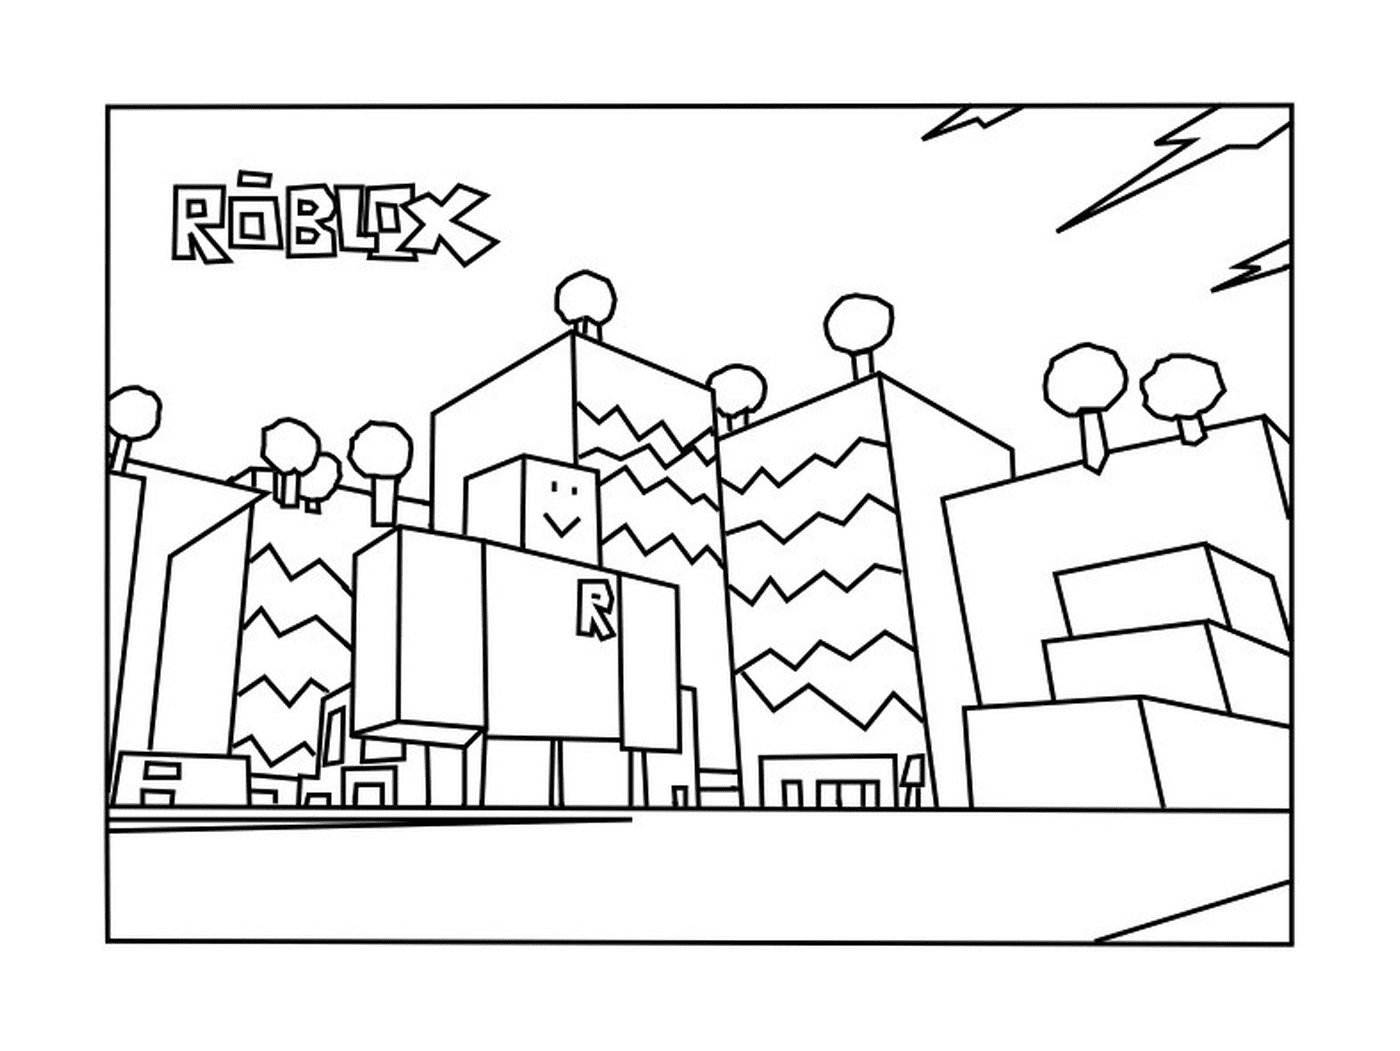  Colouring page of a Roblox building 